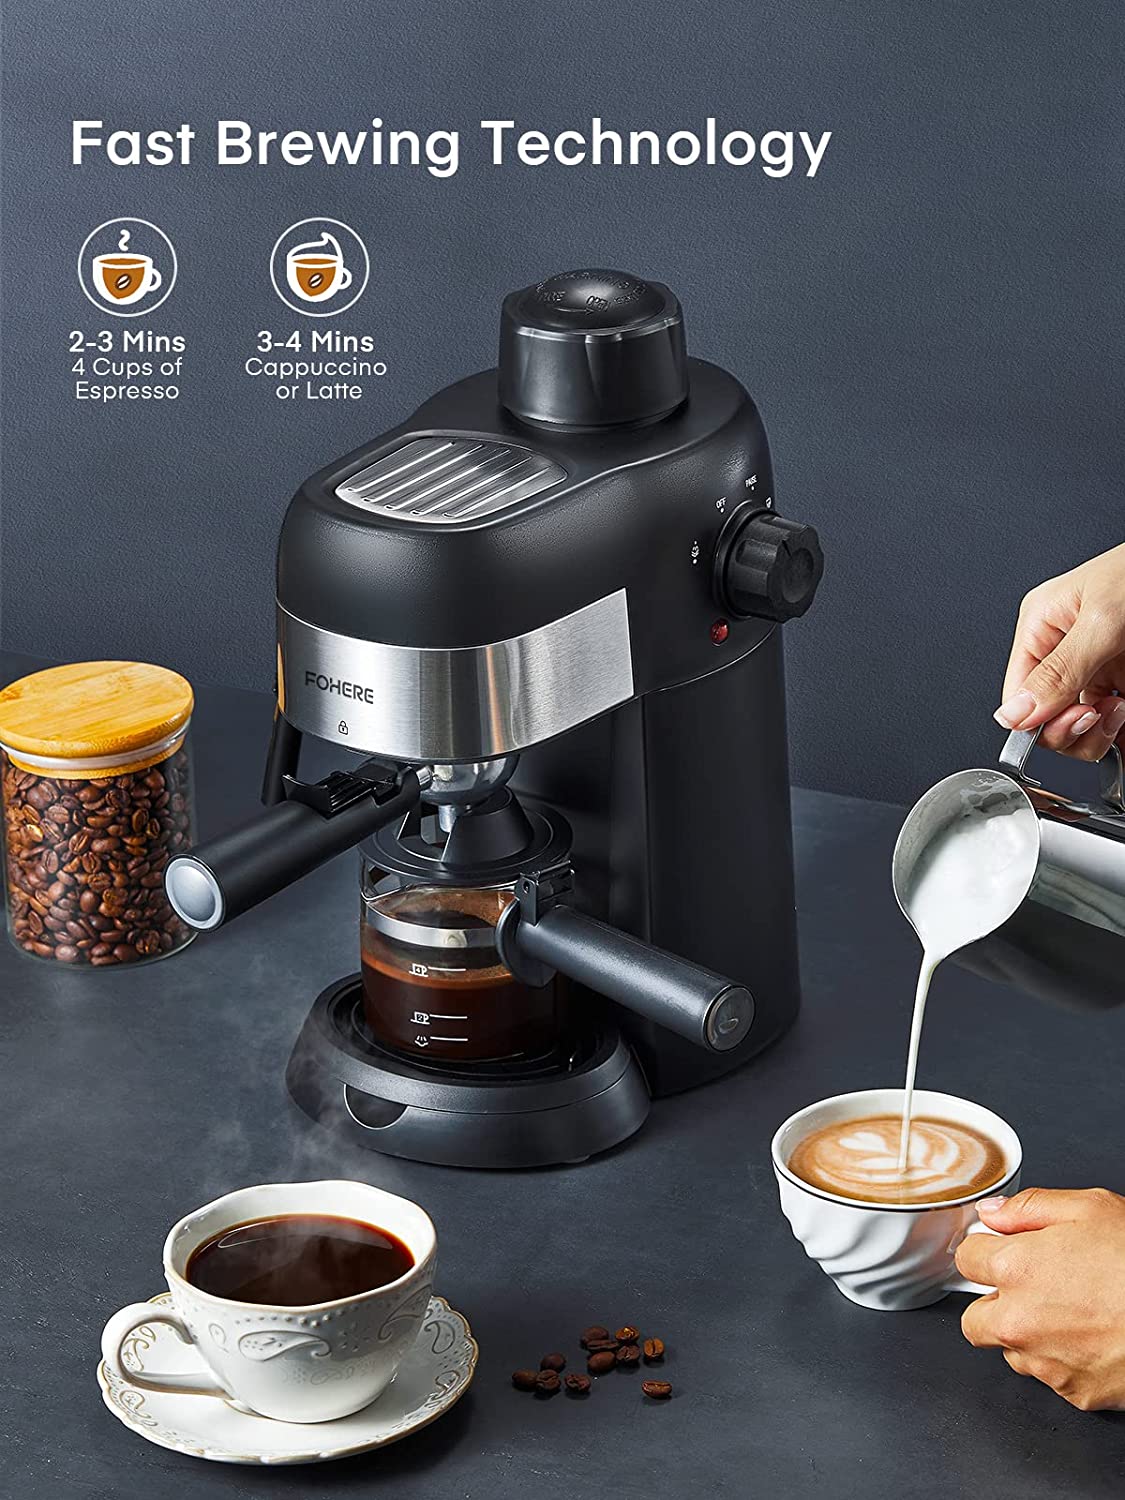 fast brewing technology, FOHERE Espresso Machine, 3.5 Bar 4 Cup Steam Espresso Machine, Espresso and Cappuccino Maker with Milk Frother and Carafe, Professional Compact Coffee Machine for Espresso, Cappuccino, Latte and Mocha